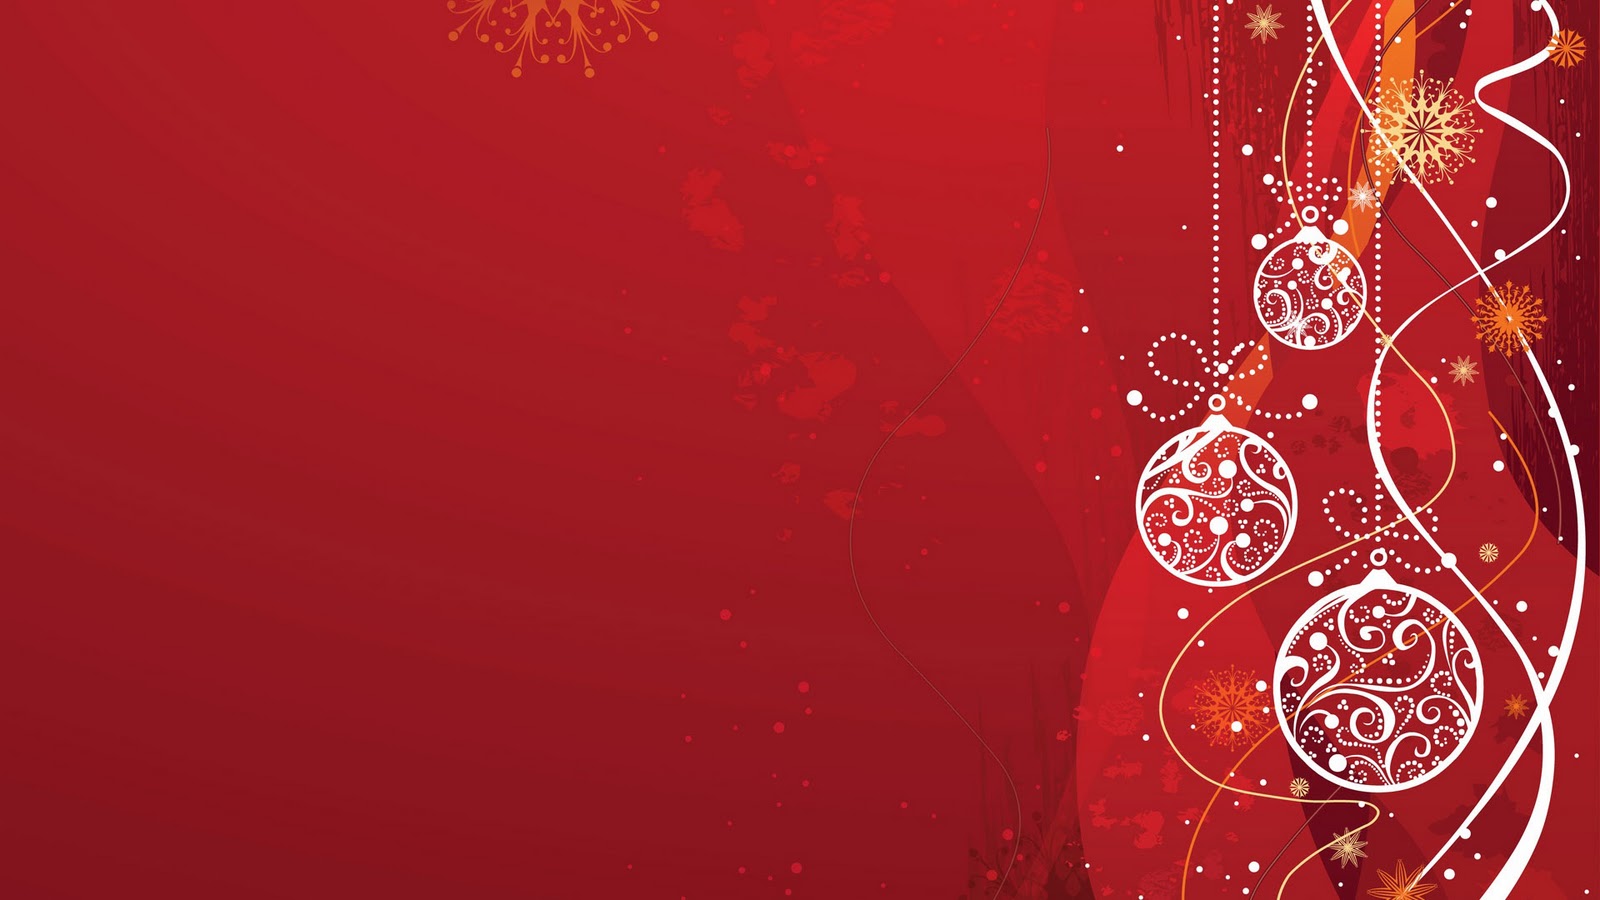 Christmas Backgrounds HD Wallpapers9 1600x900